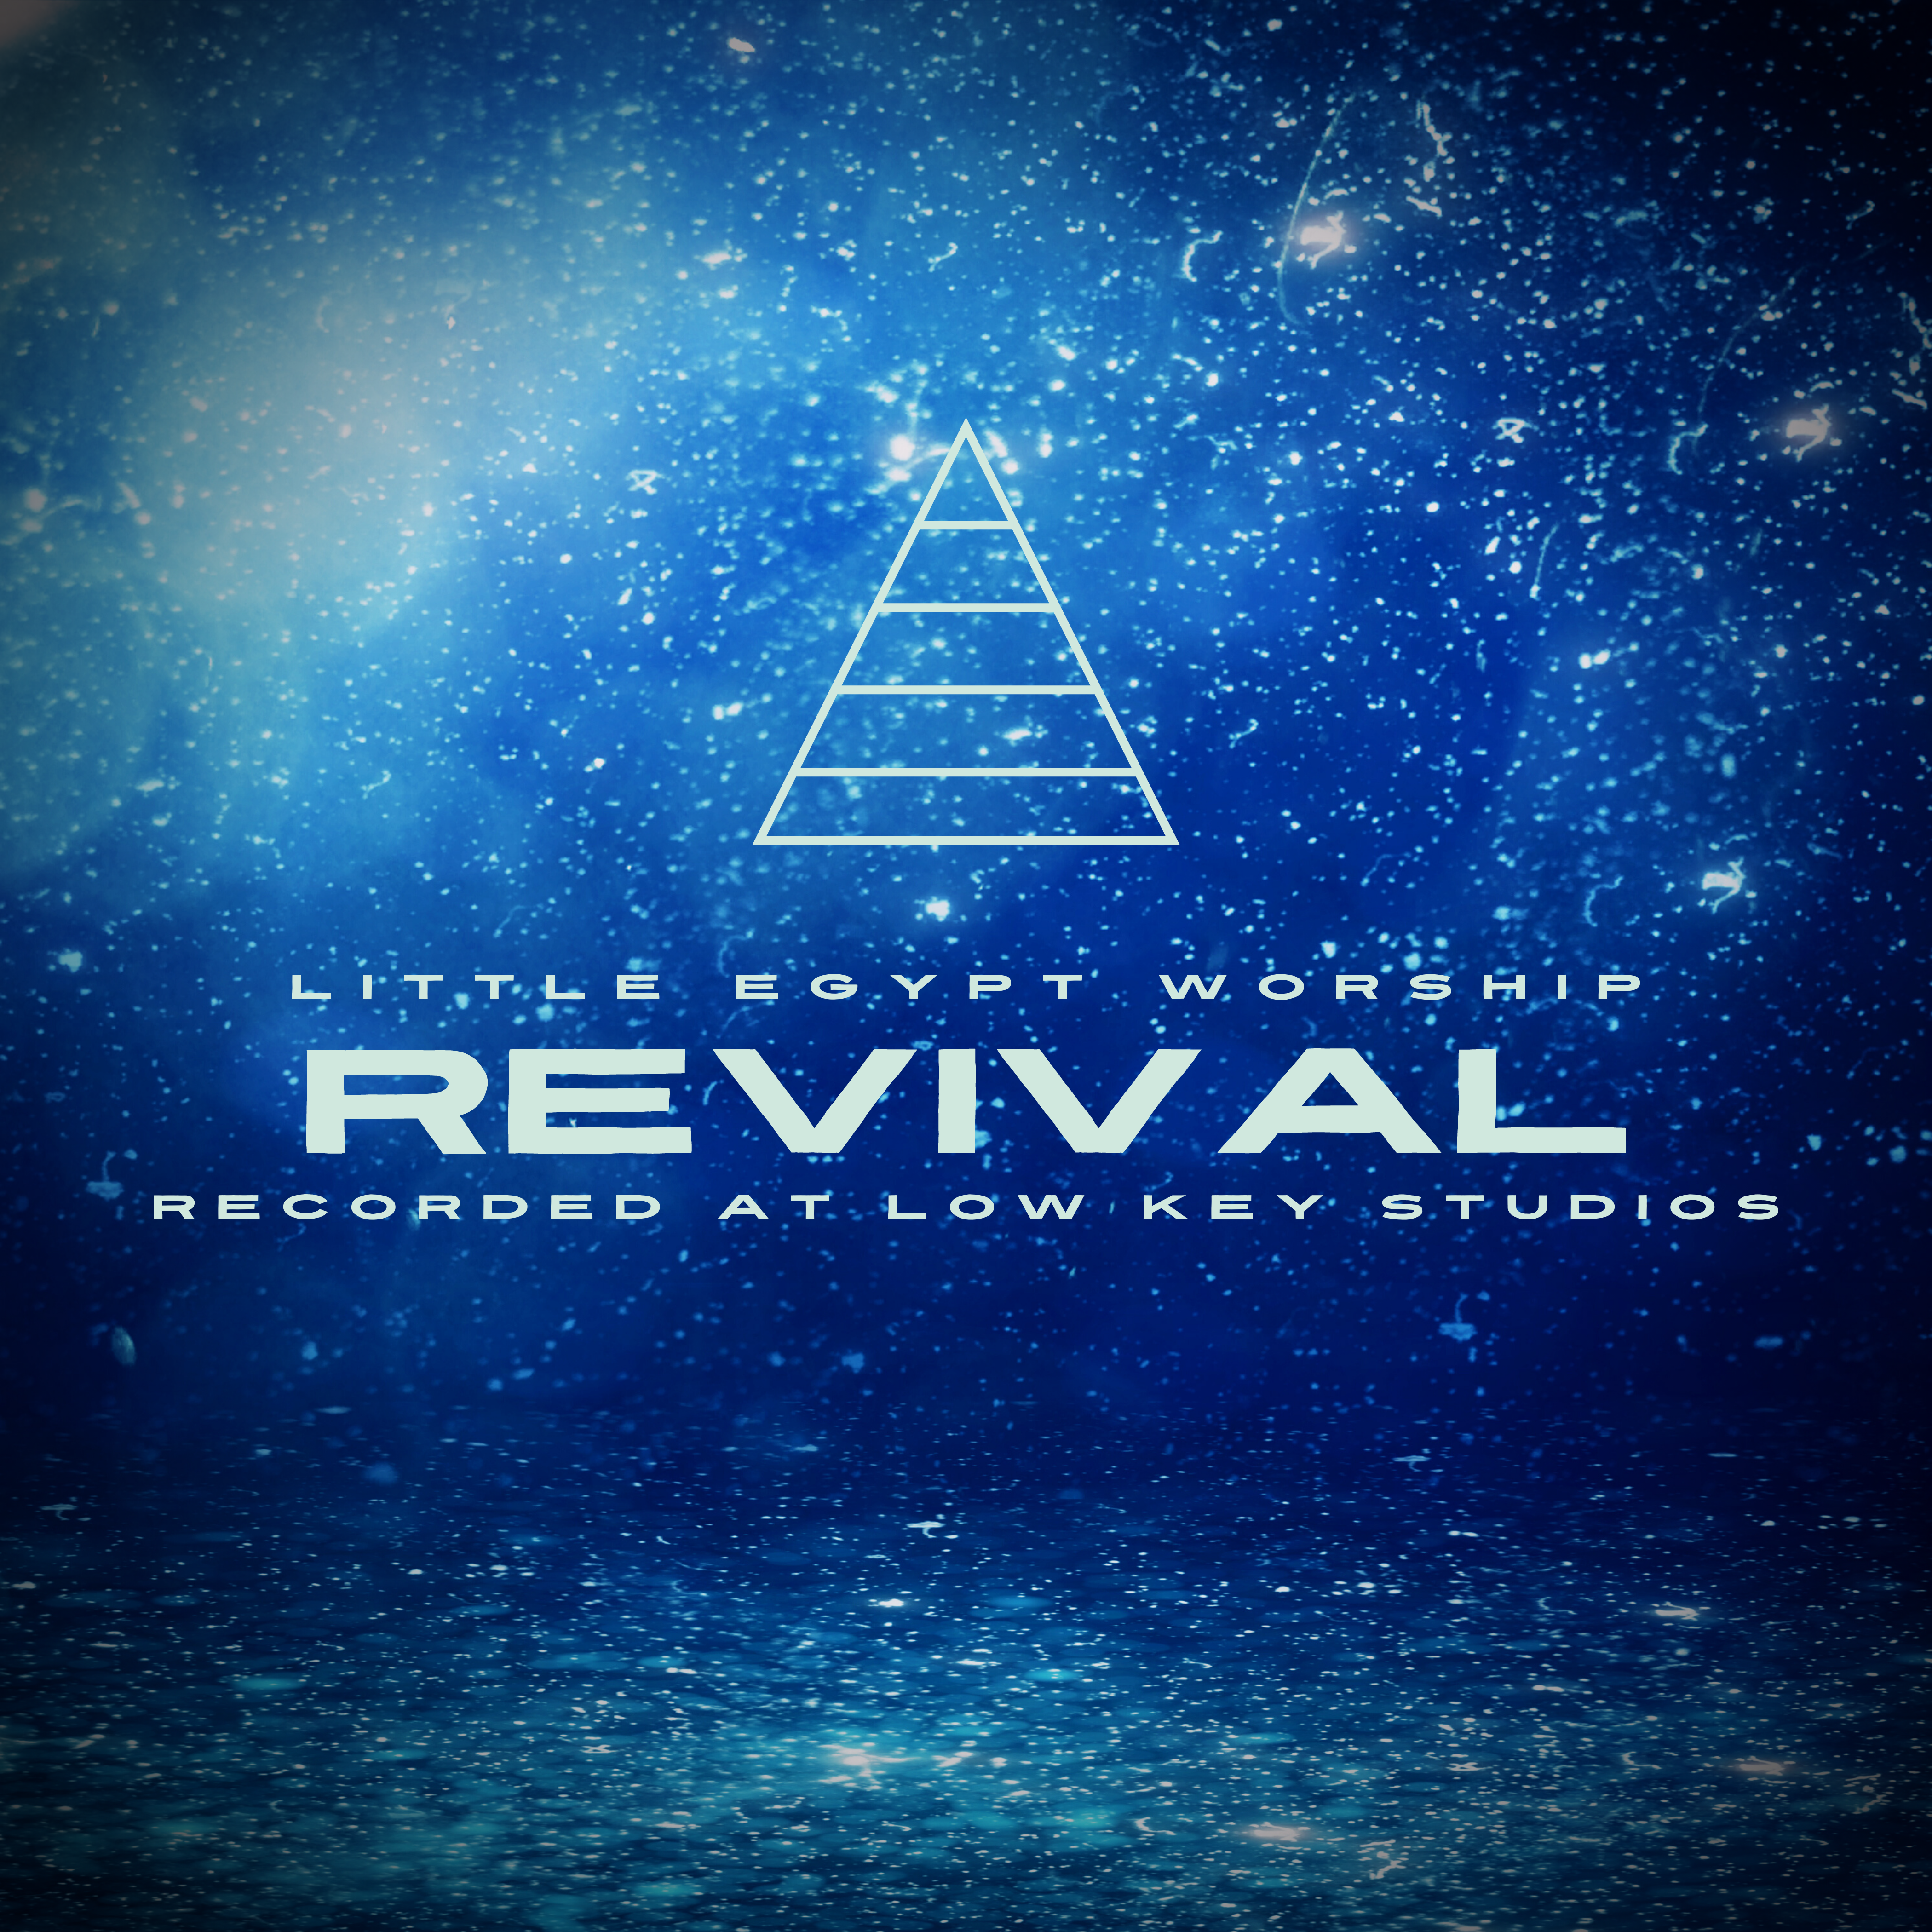 ‘REVIVAL’ BY LITTLE EGYPT WORSHIP OUT TODAY